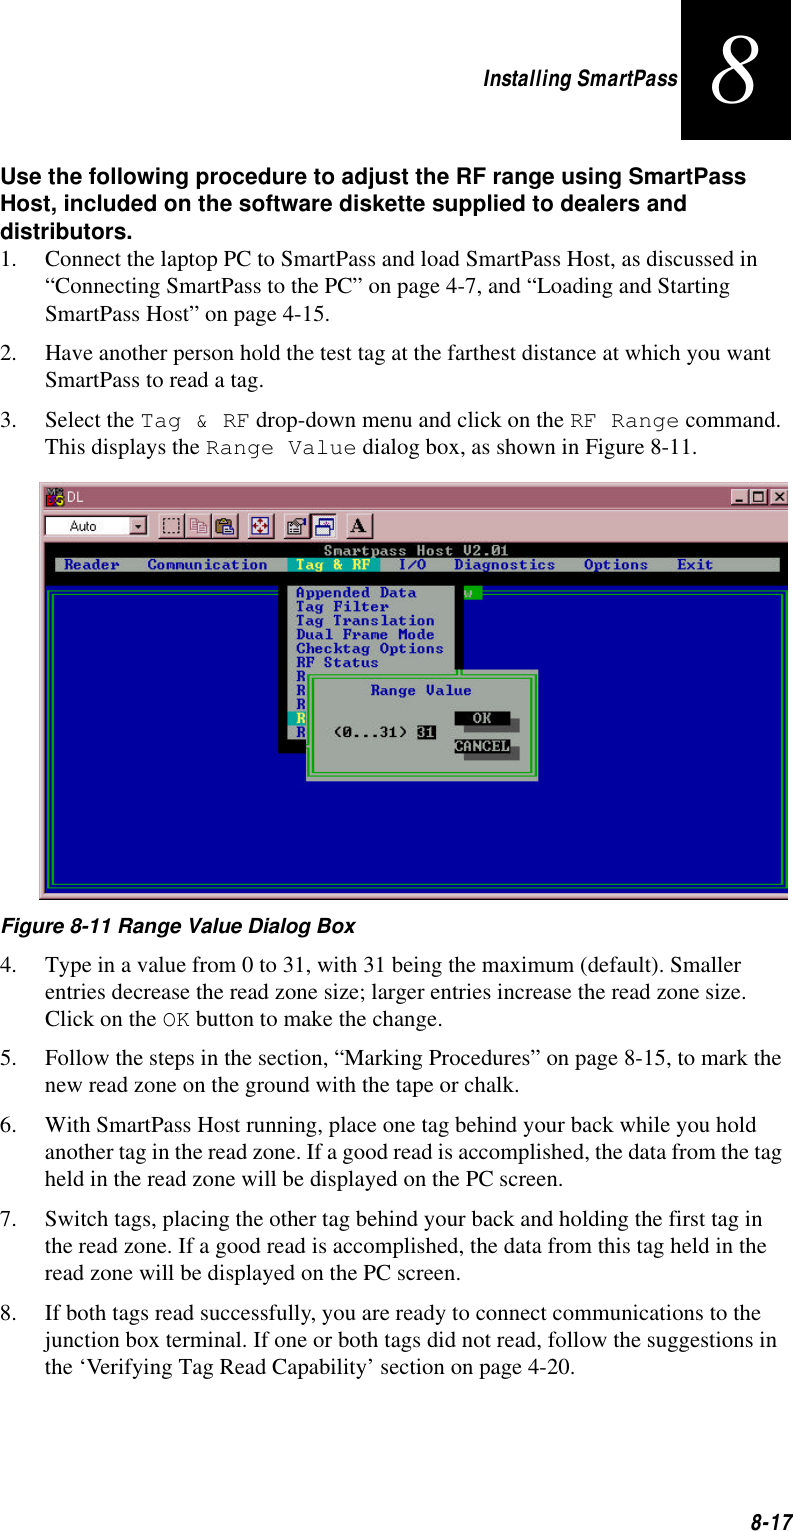 Installing SmartPass8-178Use the following procedure to adjust the RF range using SmartPass Host, included on the software diskette supplied to dealers and distributors.1. Connect the laptop PC to SmartPass and load SmartPass Host, as discussed in “Connecting SmartPass to the PC” on page 4-7, and “Loading and Starting SmartPass Host” on page 4-15.2. Have another person hold the test tag at the farthest distance at which you want SmartPass to read a tag. 3. Select the Tag &amp; RF drop-down menu and click on the RF Range command. This displays the Range Value dialog box, as shown in Figure 8-11.    Figure 8-11 Range Value Dialog Box4. Type in a value from 0 to 31, with 31 being the maximum (default). Smaller entries decrease the read zone size; larger entries increase the read zone size. Click on the OK button to make the change. 5. Follow the steps in the section, “Marking Procedures” on page 8-15, to mark the new read zone on the ground with the tape or chalk. 6. With SmartPass Host running, place one tag behind your back while you hold another tag in the read zone. If a good read is accomplished, the data from the tag held in the read zone will be displayed on the PC screen.7. Switch tags, placing the other tag behind your back and holding the first tag in the read zone. If a good read is accomplished, the data from this tag held in the read zone will be displayed on the PC screen.8. If both tags read successfully, you are ready to connect communications to the junction box terminal. If one or both tags did not read, follow the suggestions in the ‘Verifying Tag Read Capability’ section on page 4-20.